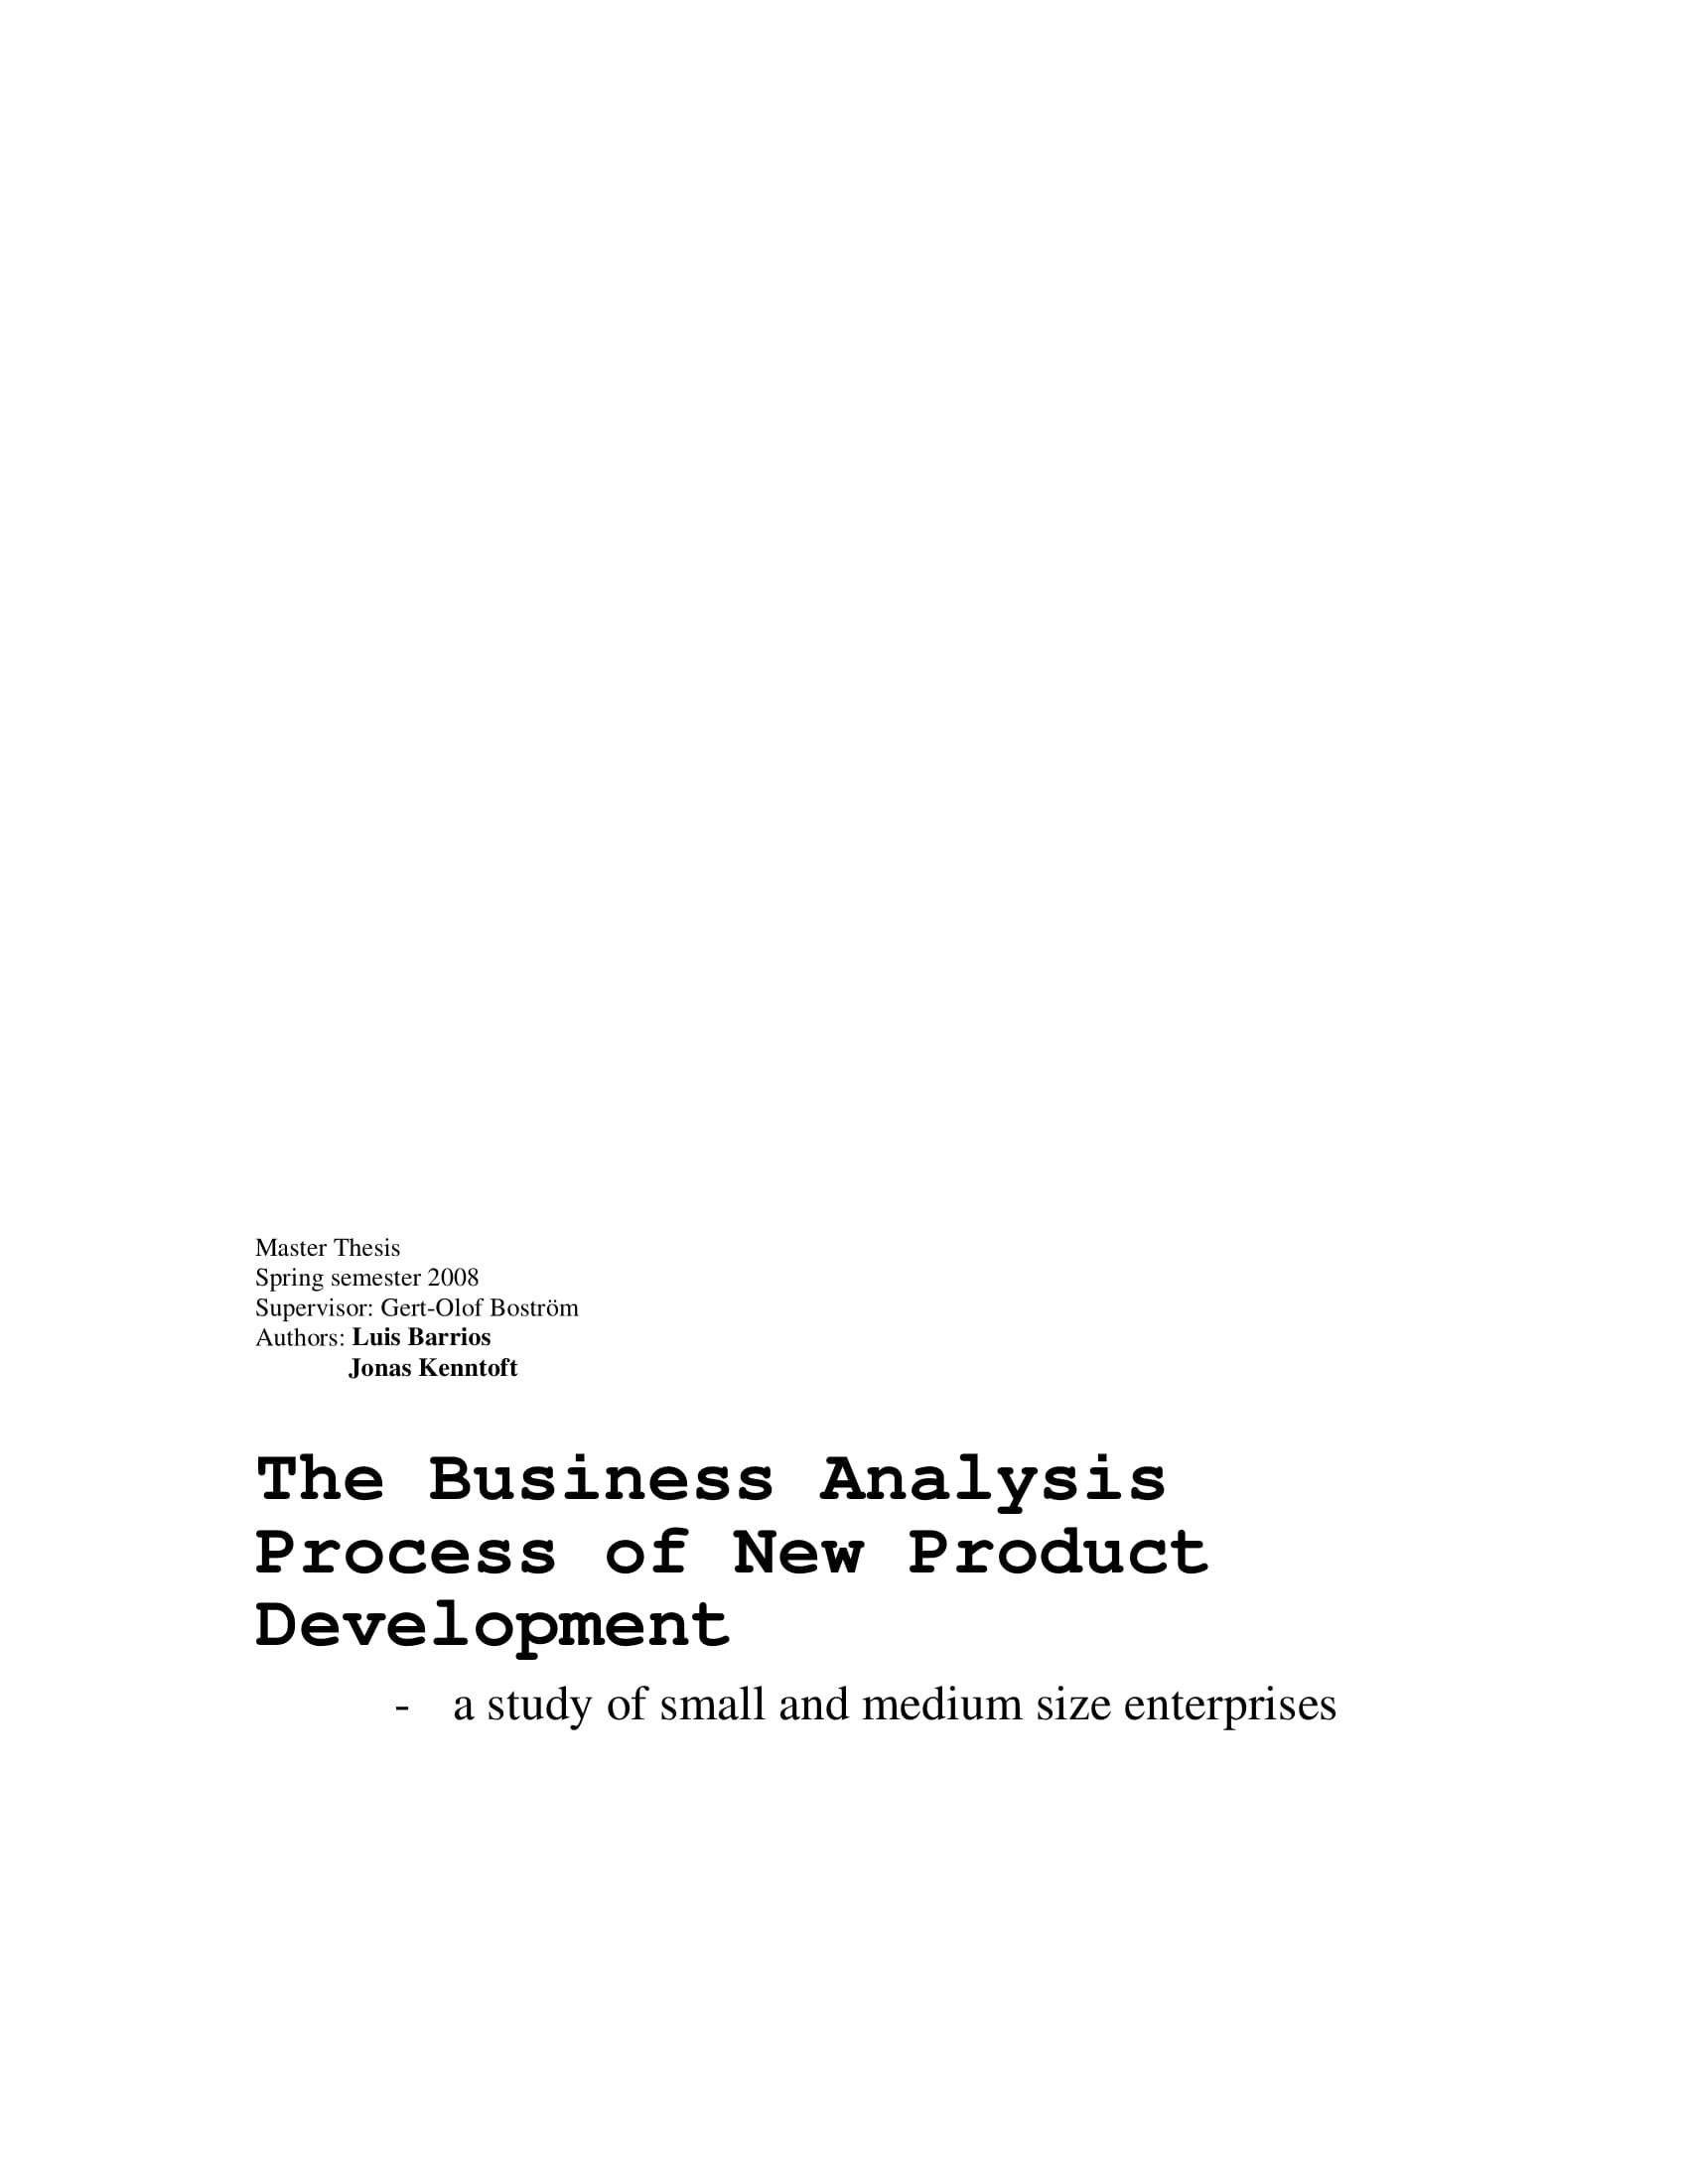 new product process and financial analysis example